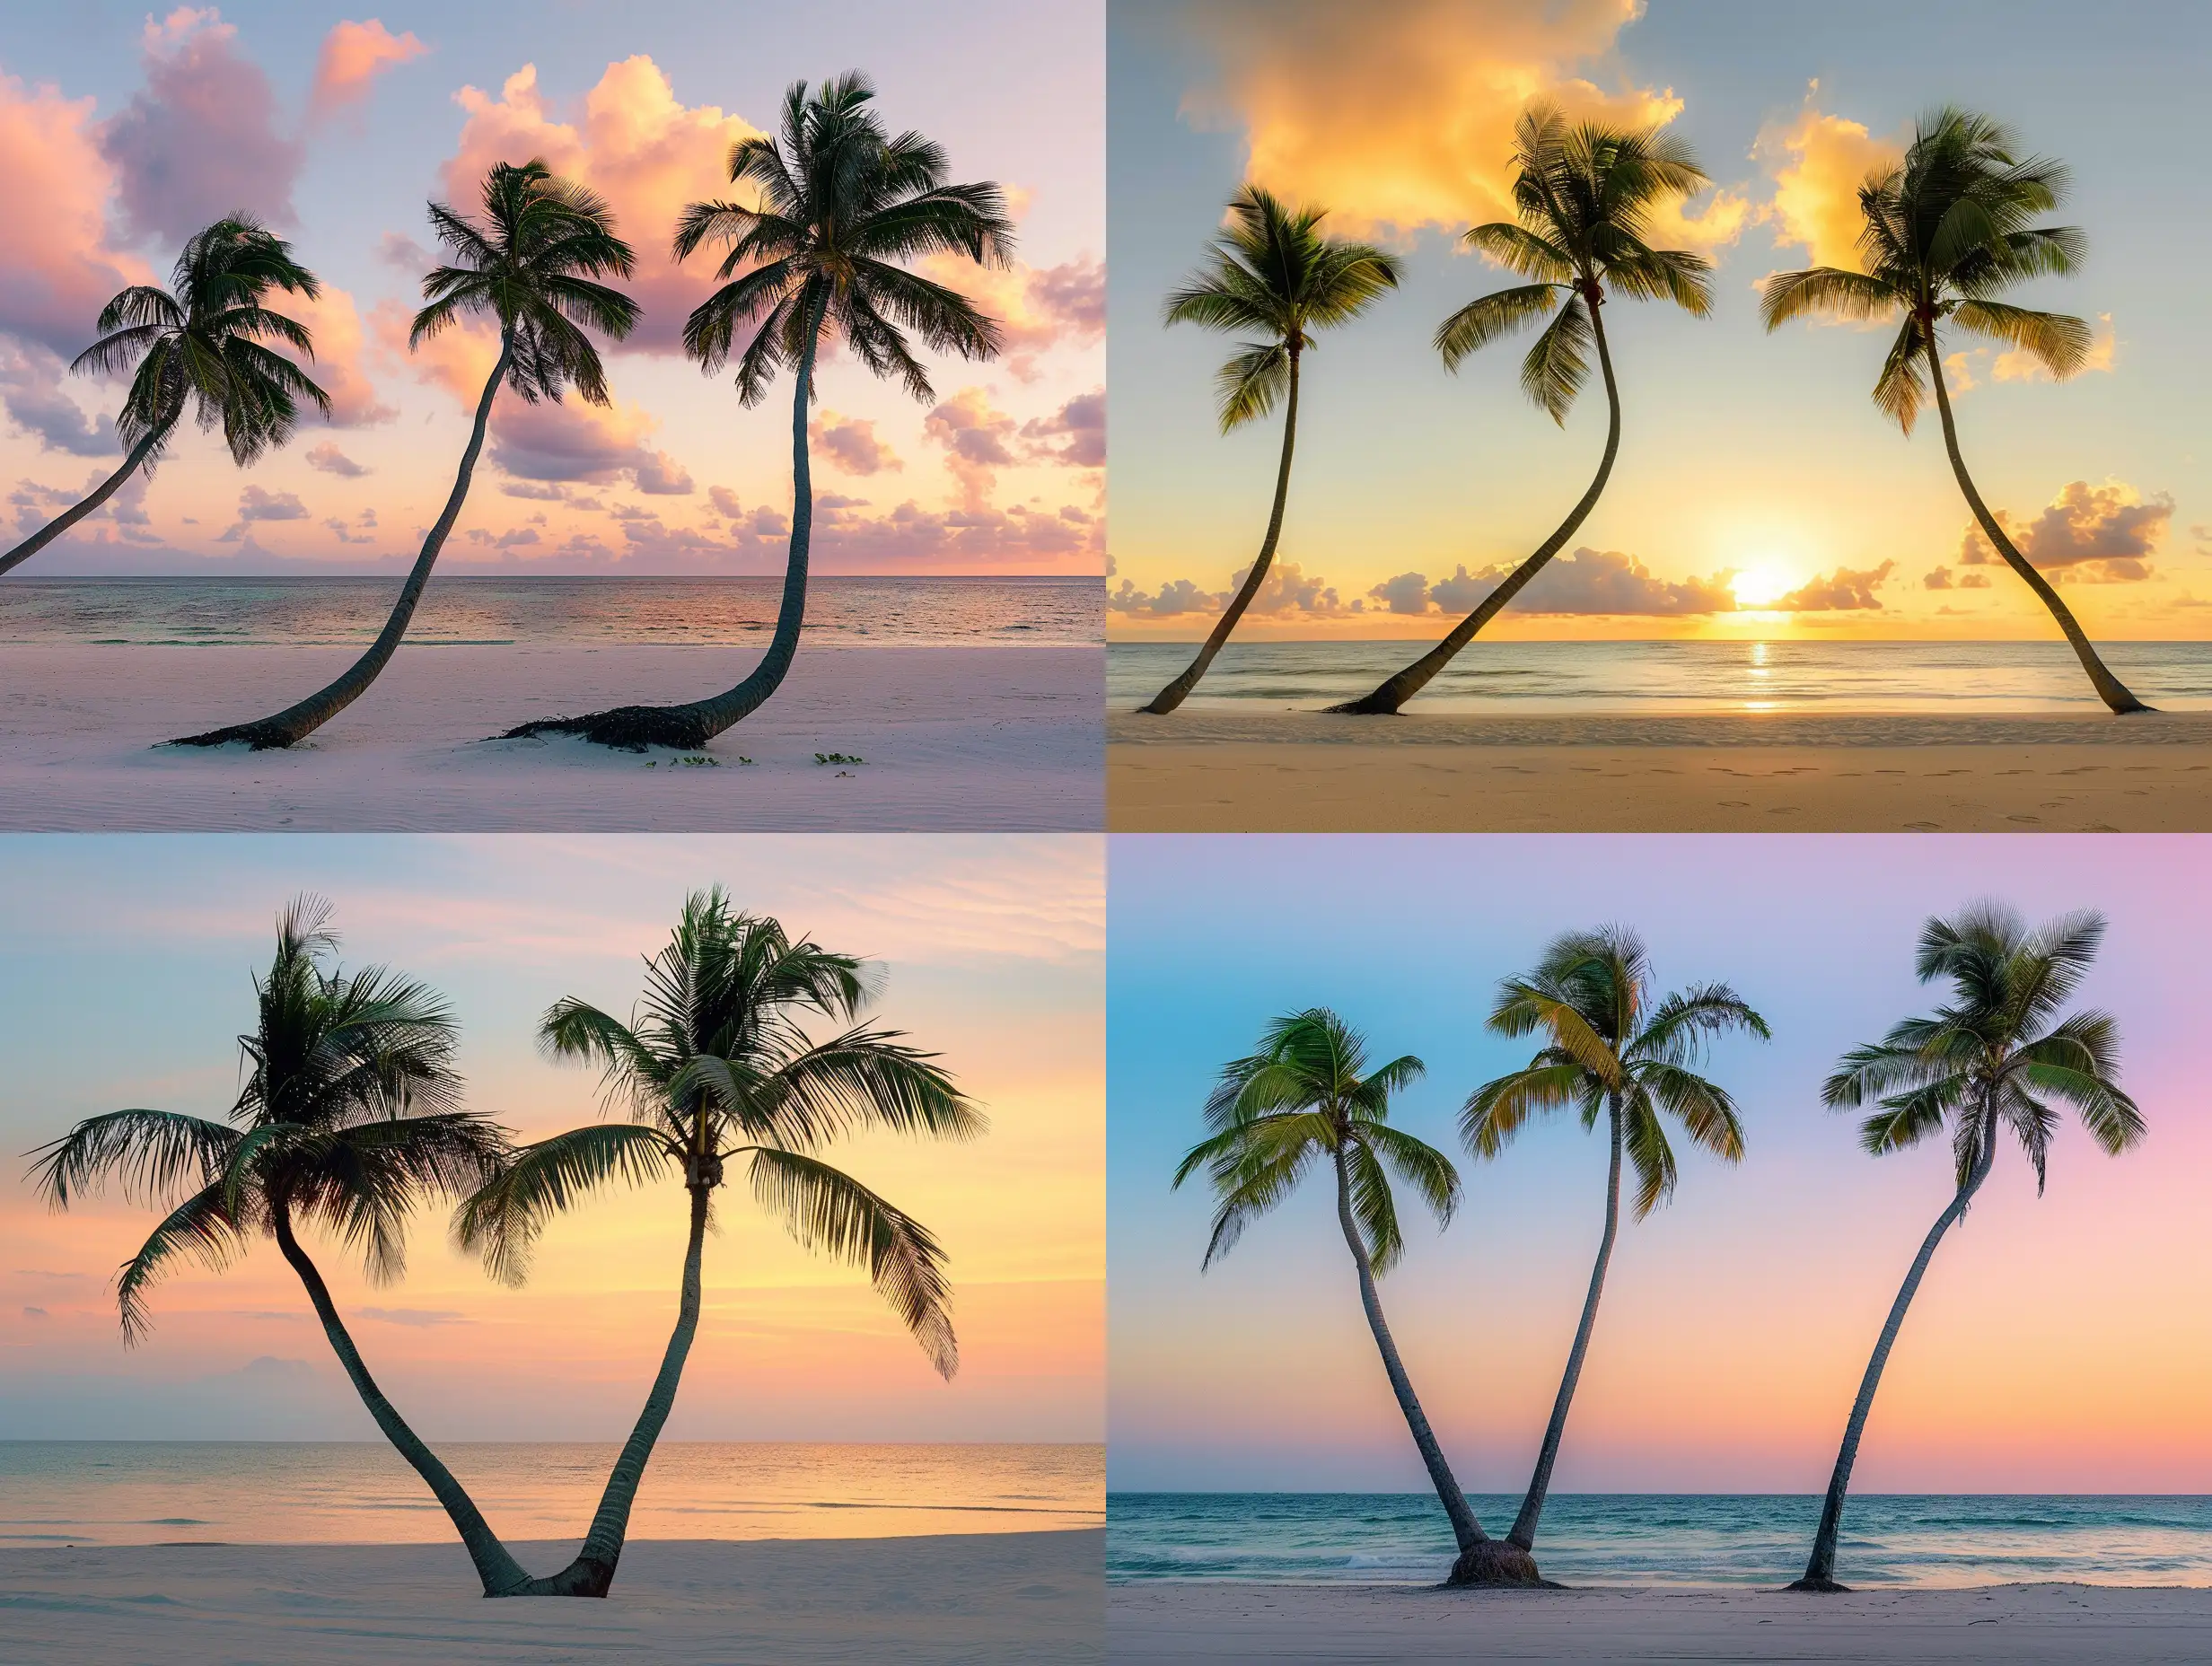 3 straight palm trees with one very bent palm tree on tropical beach at Golden hour, sunset, stunning photography, masterpiece